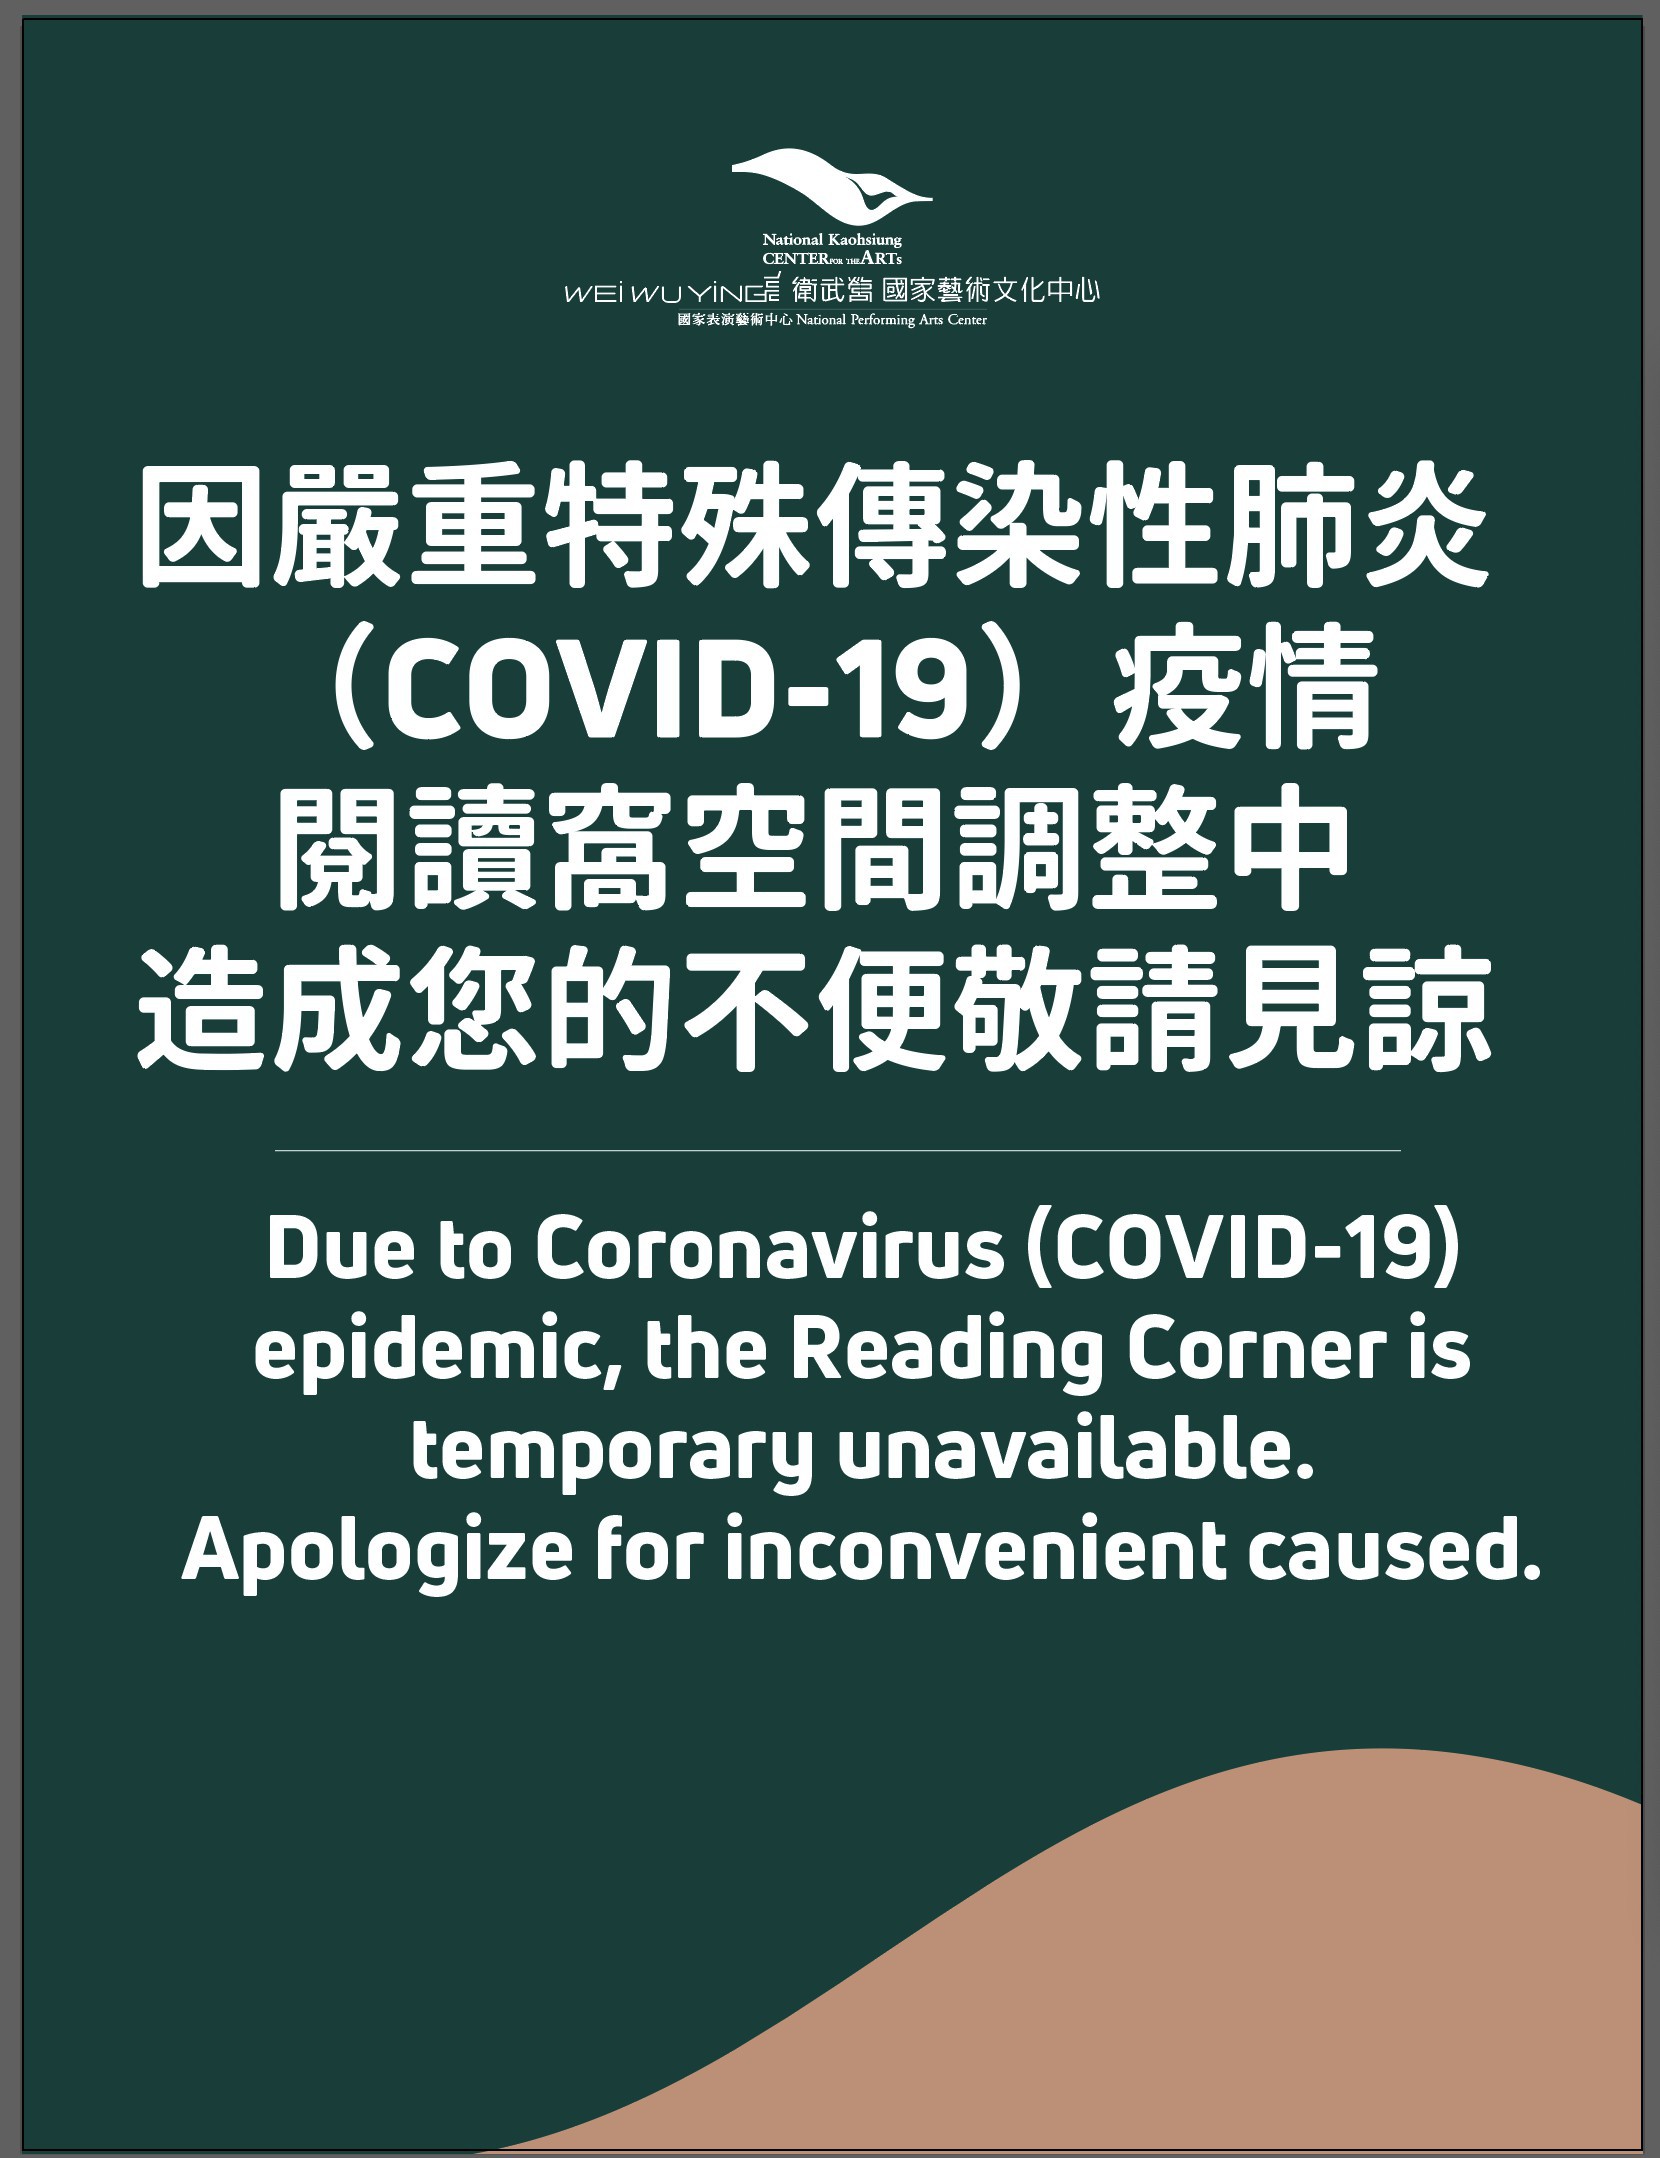 Due to Coronavirus (COVID-19) epidemic, the Reading Corner is temporary unavailable. Apologize for inconvenient caused.